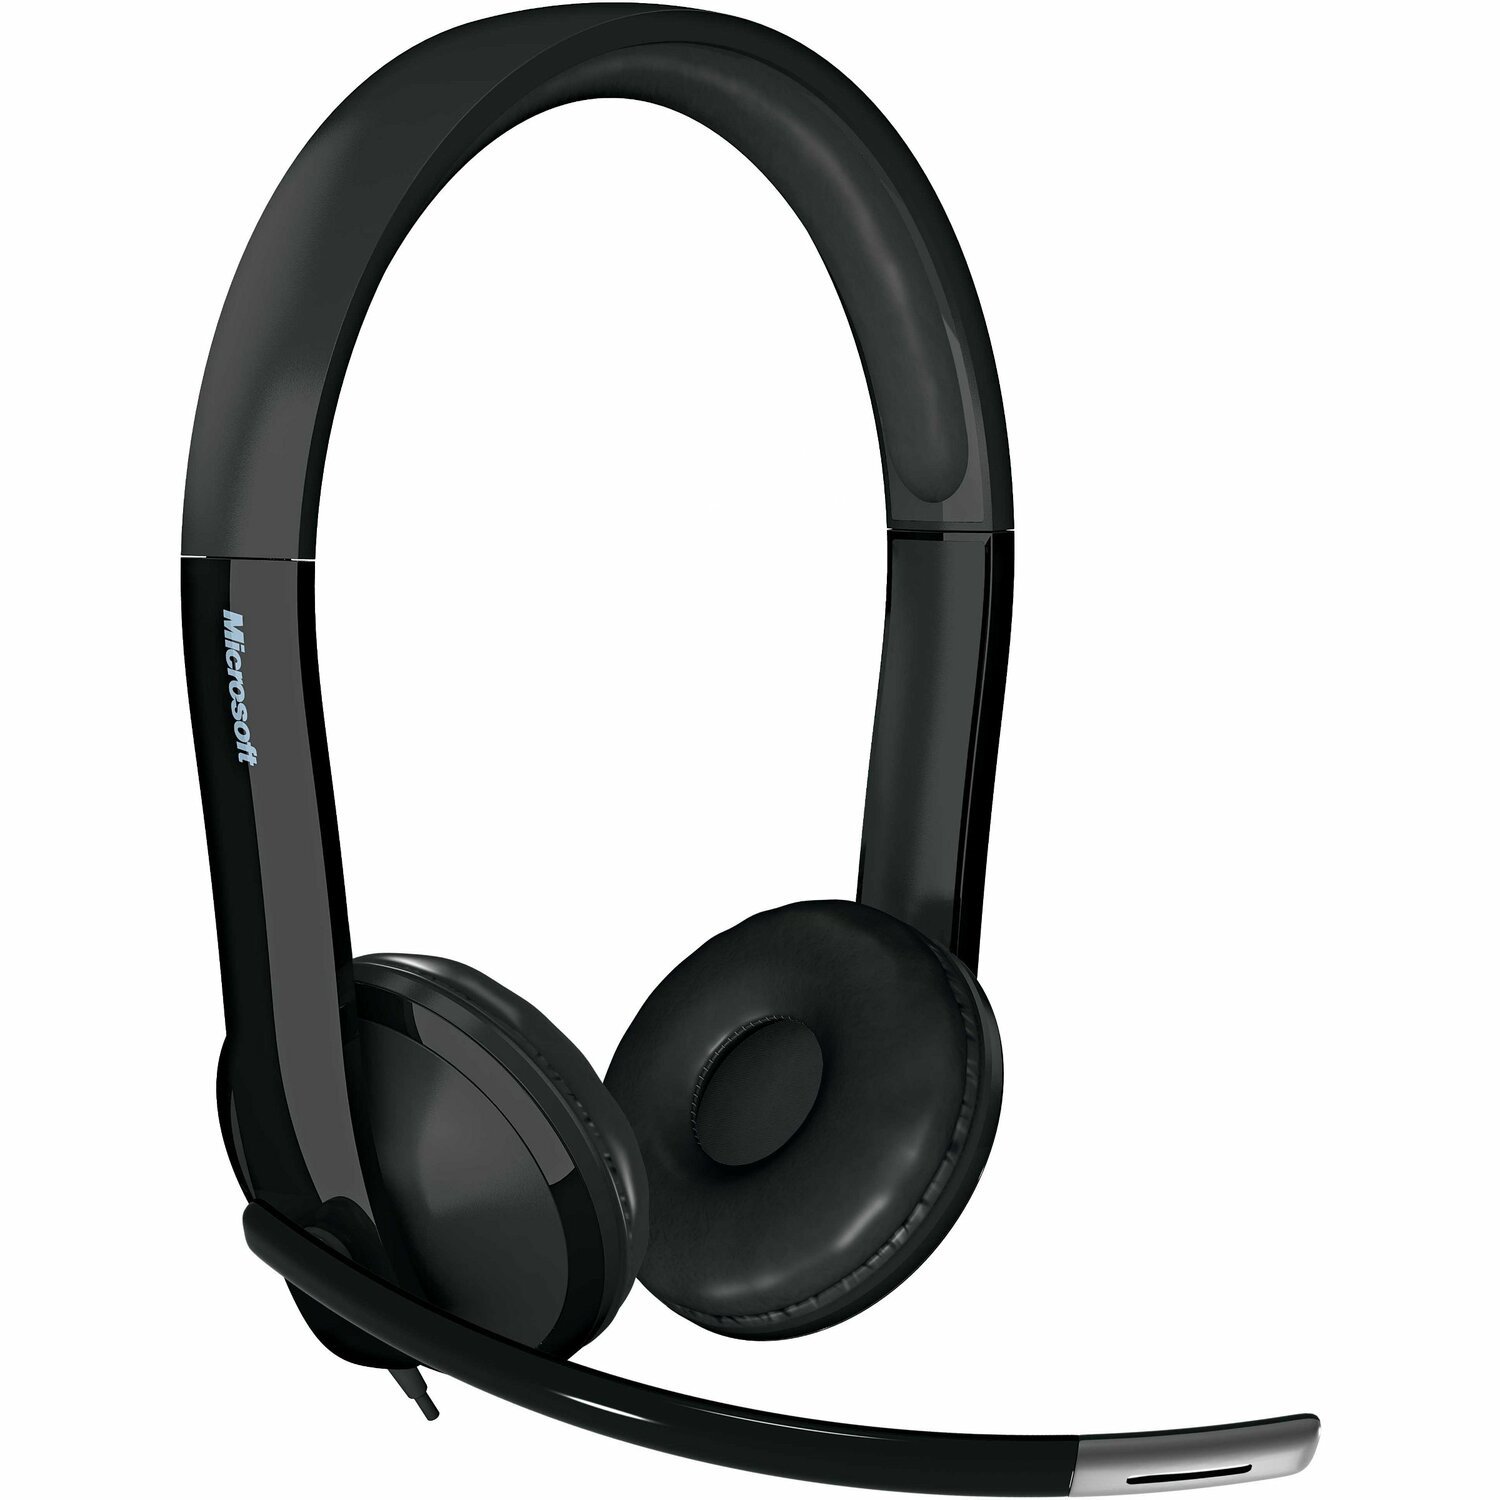 Microsoft LifeChat LX-6000 Wired Over-the-head Stereo Headset